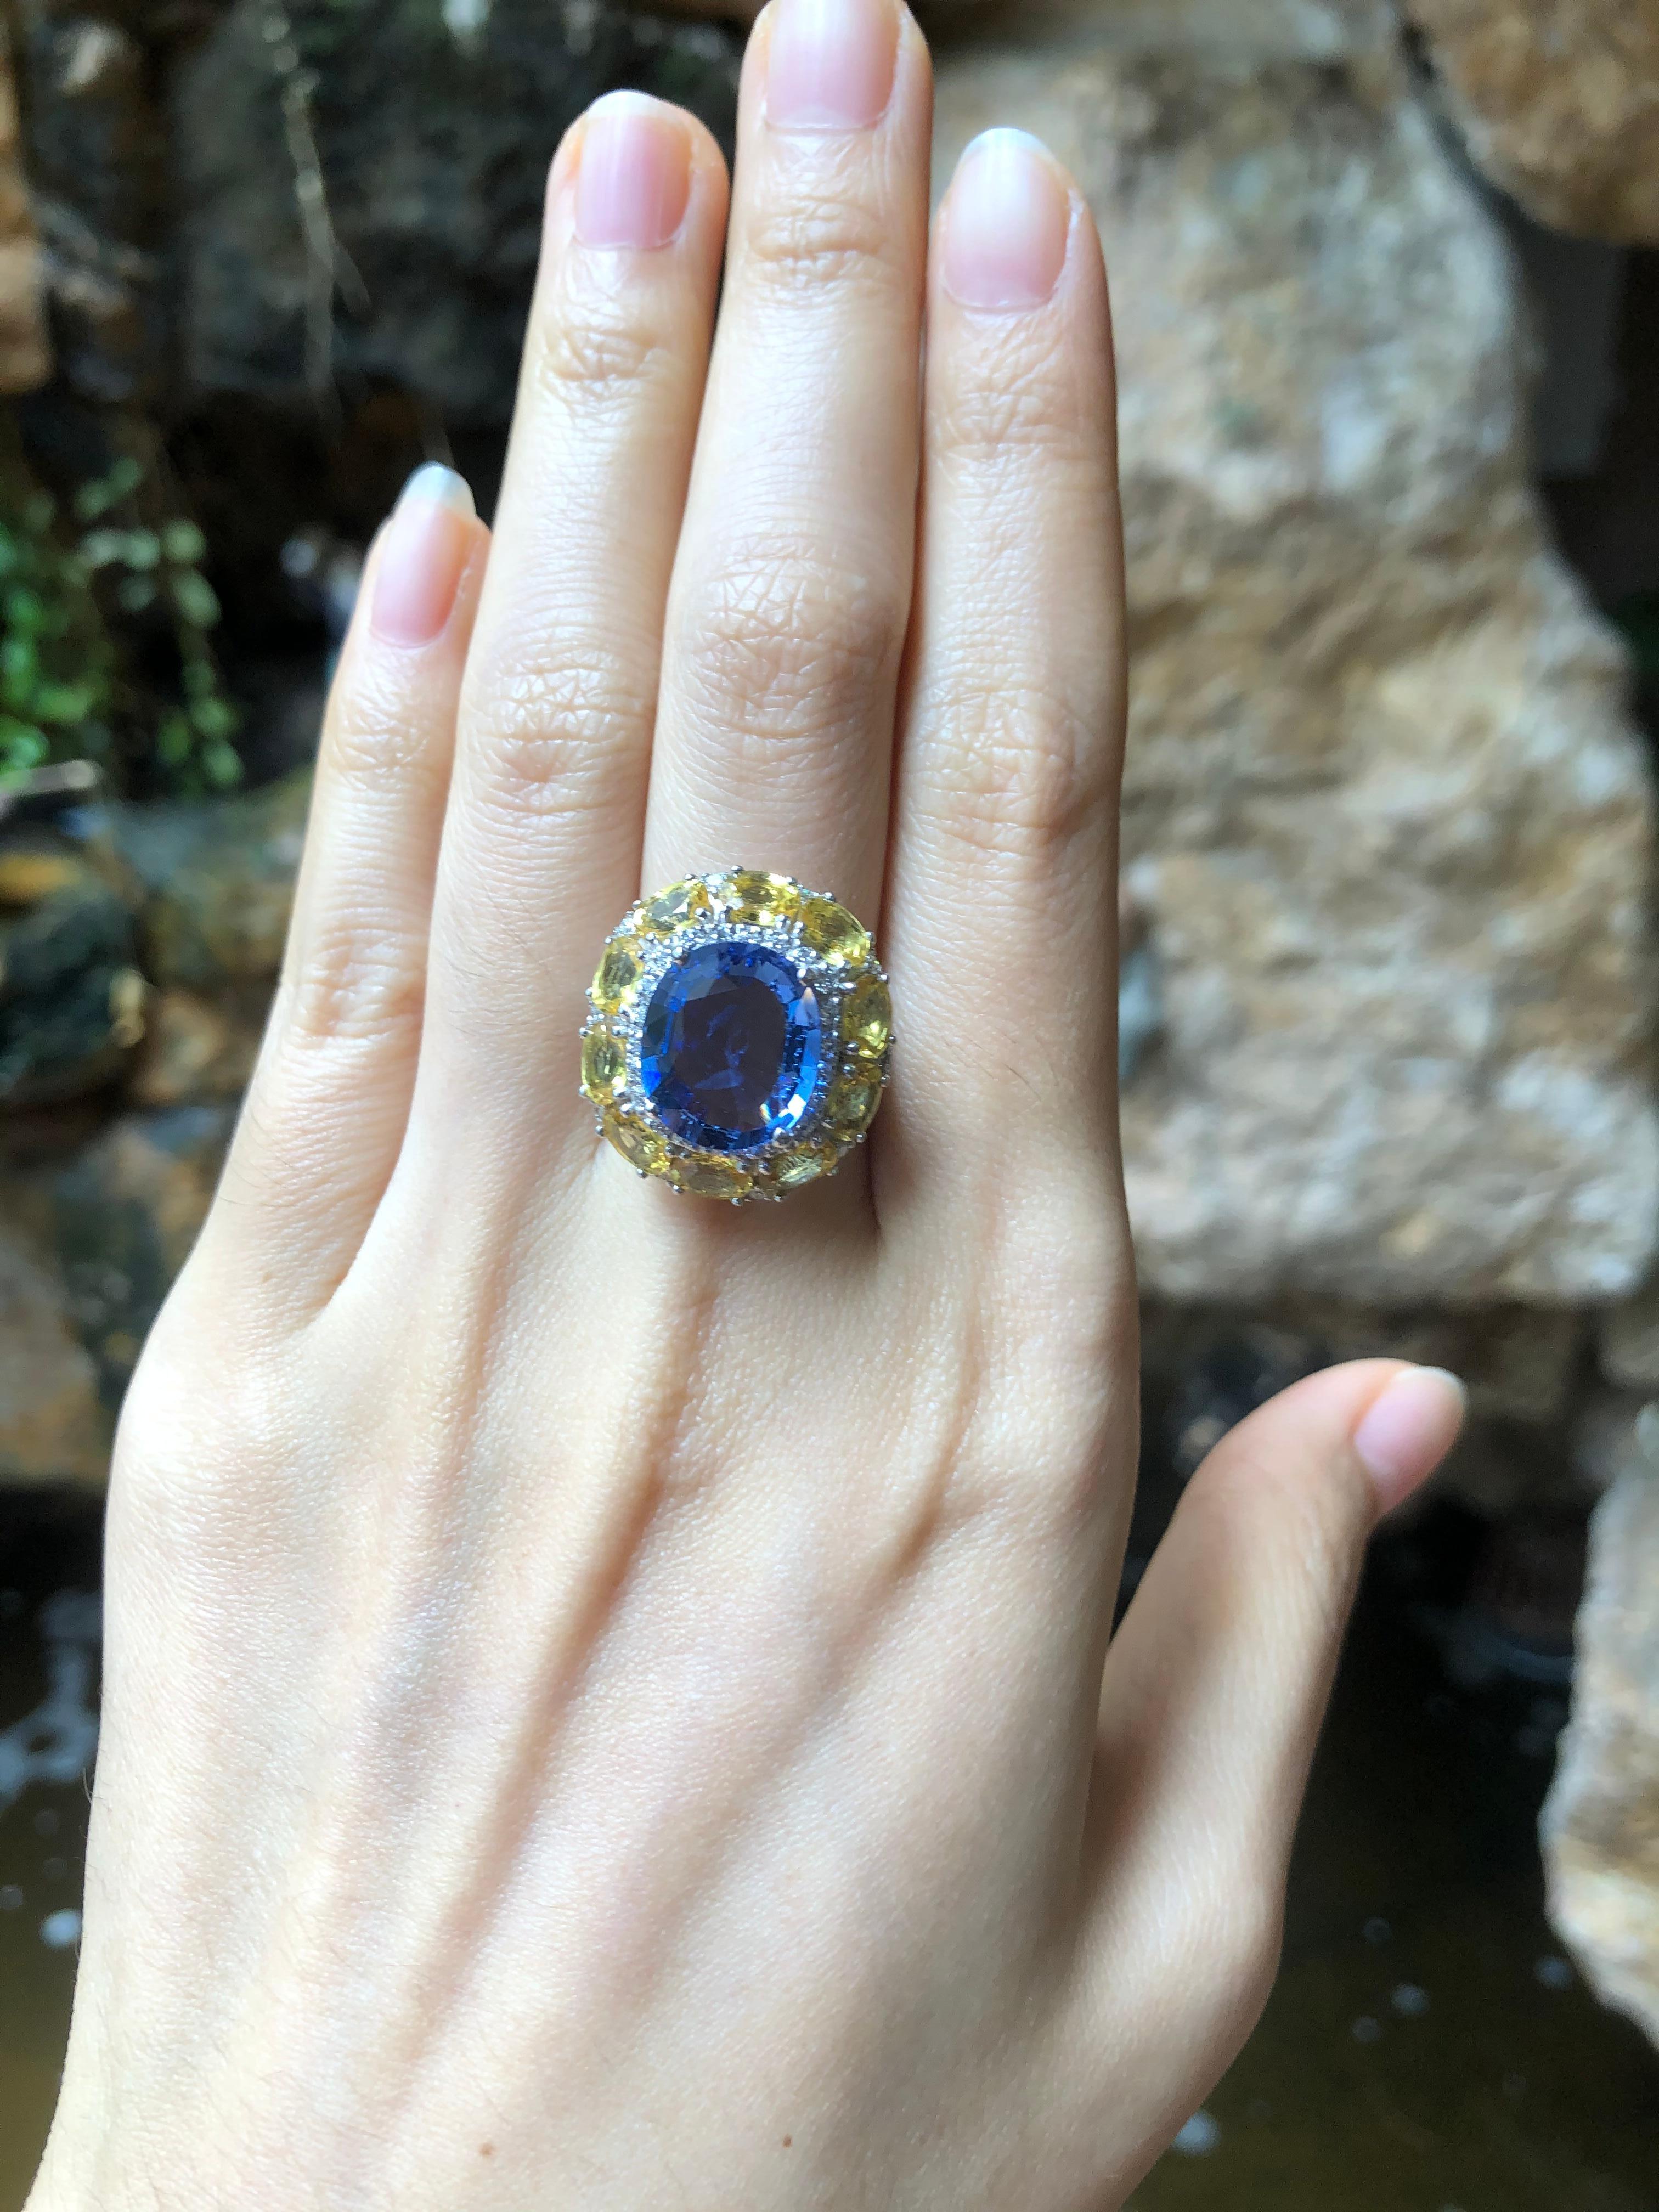 Oval Cut Blue Sapphire with Yellow Sapphire and Diamond Ring Set in 18 Karat White Gold